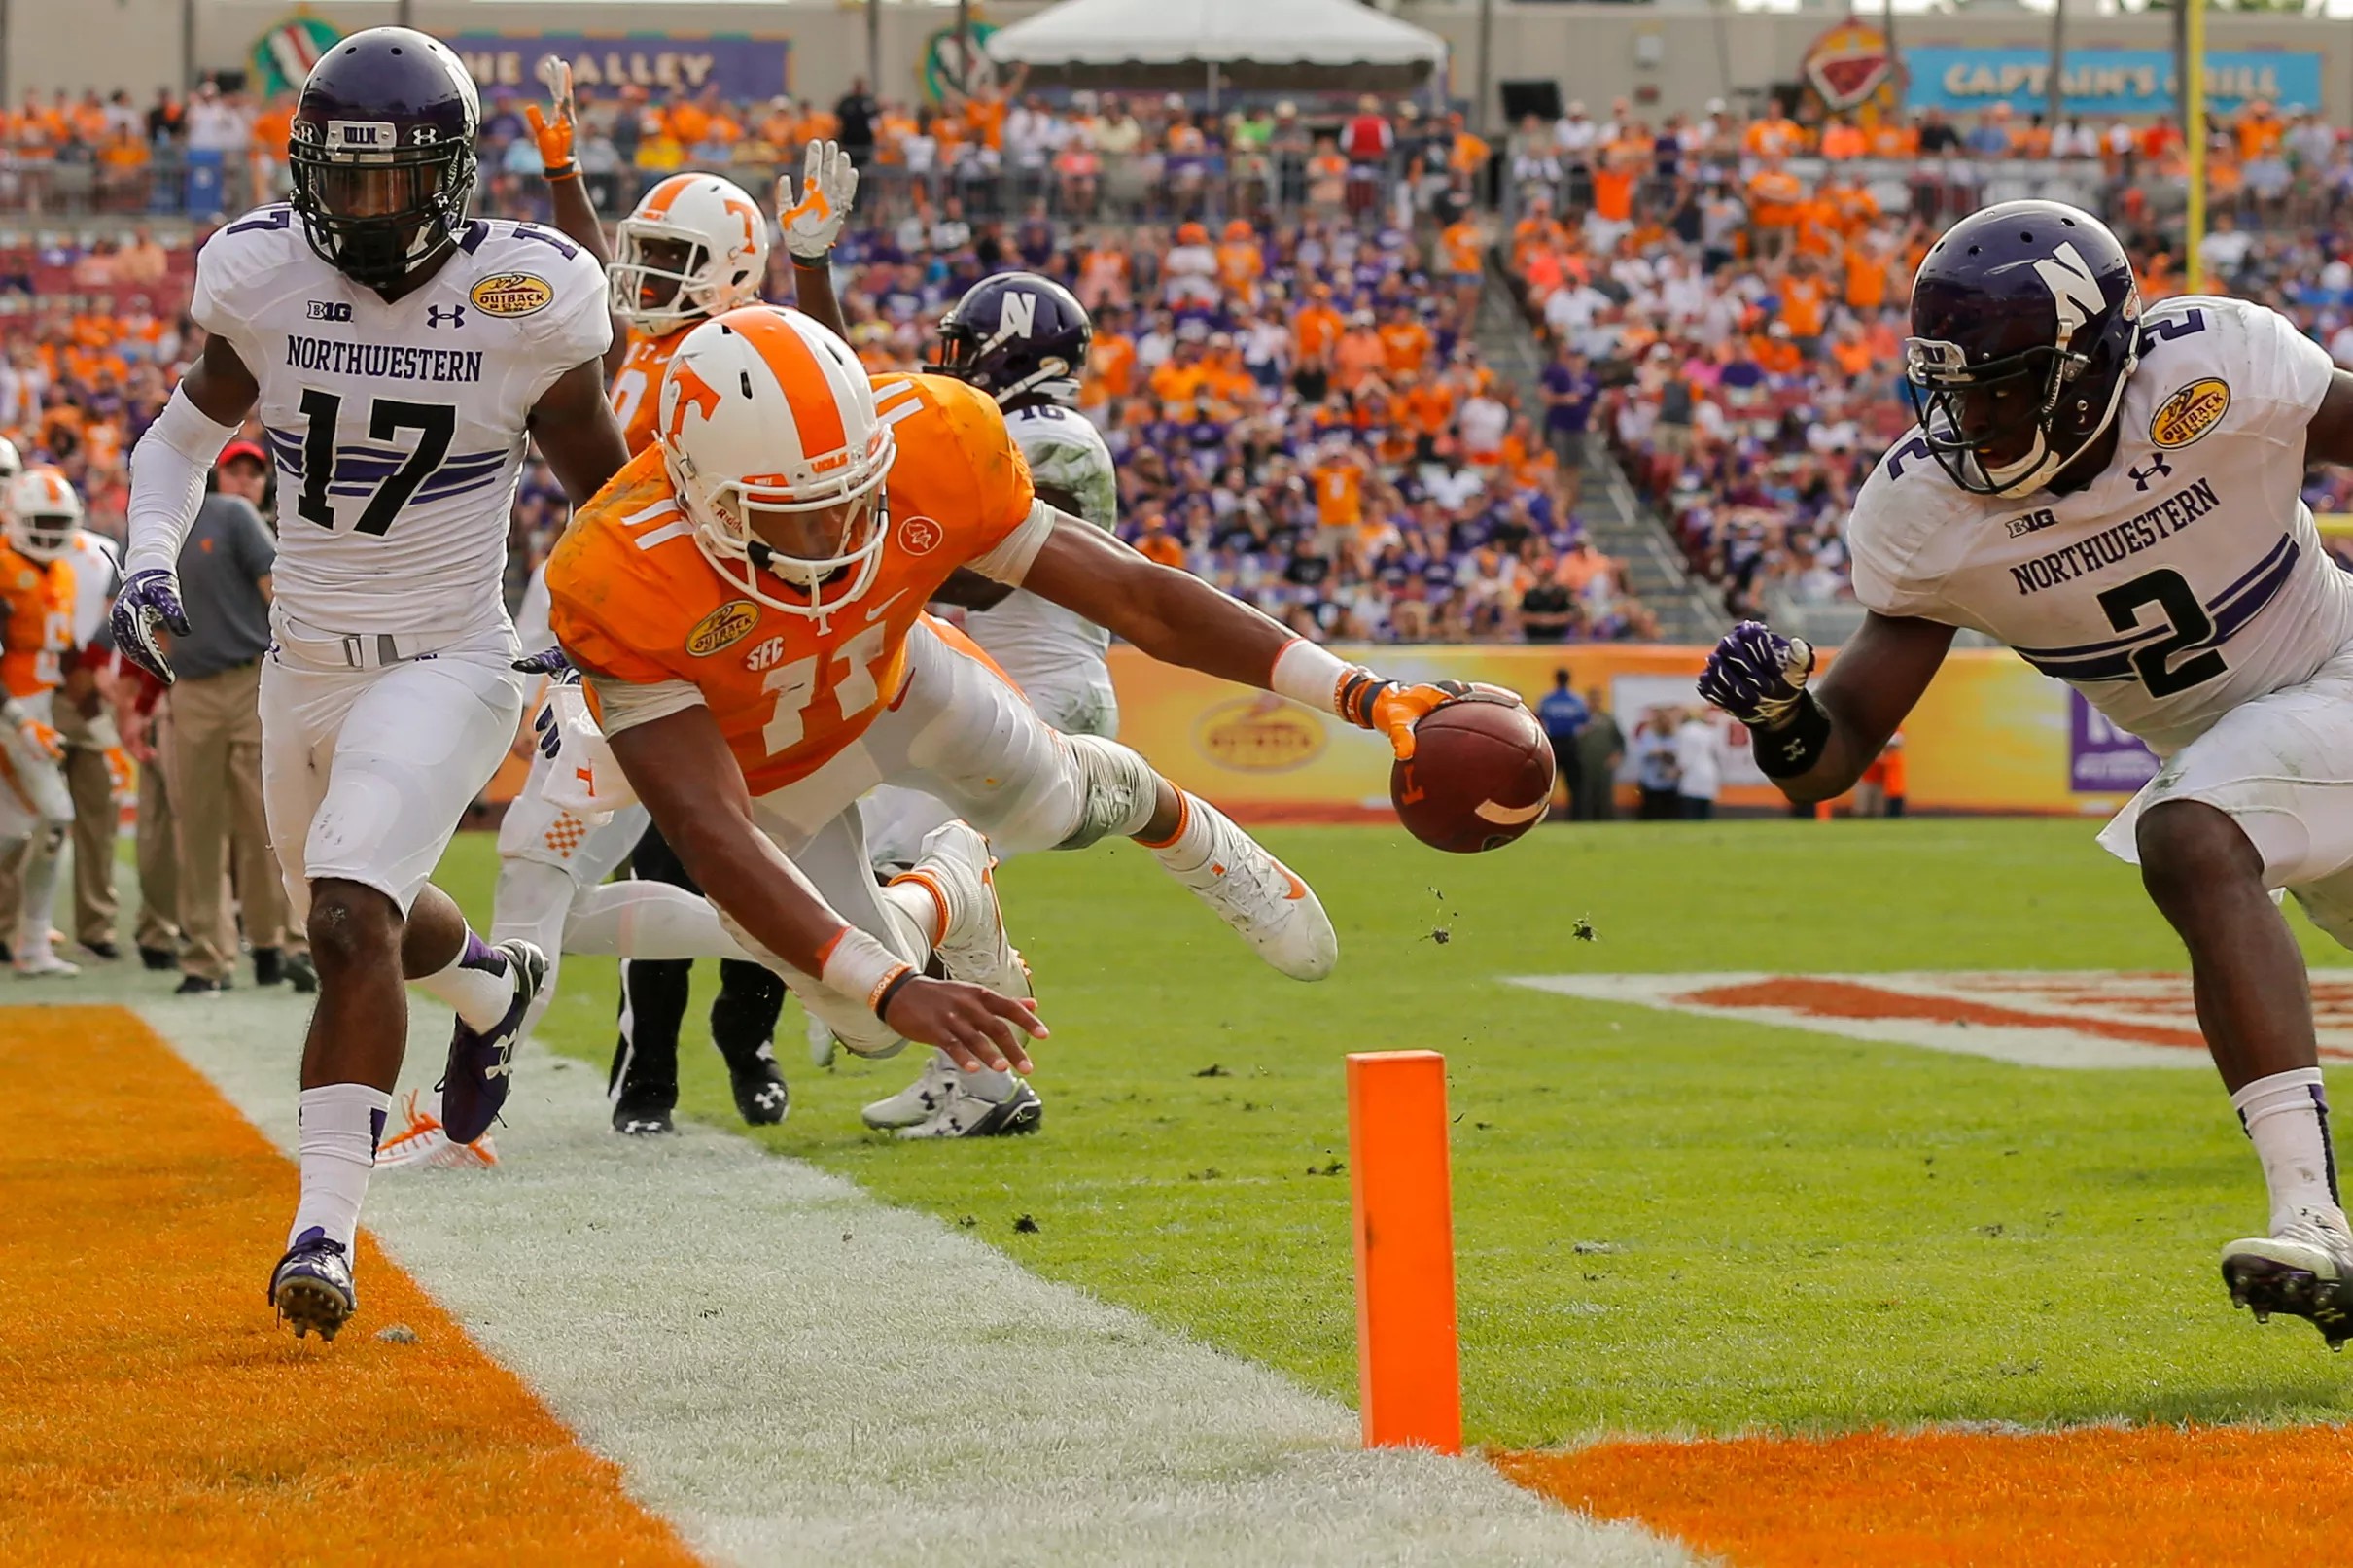 Looking back, Josh Dobbs had a pretty underrated career at Tennessee